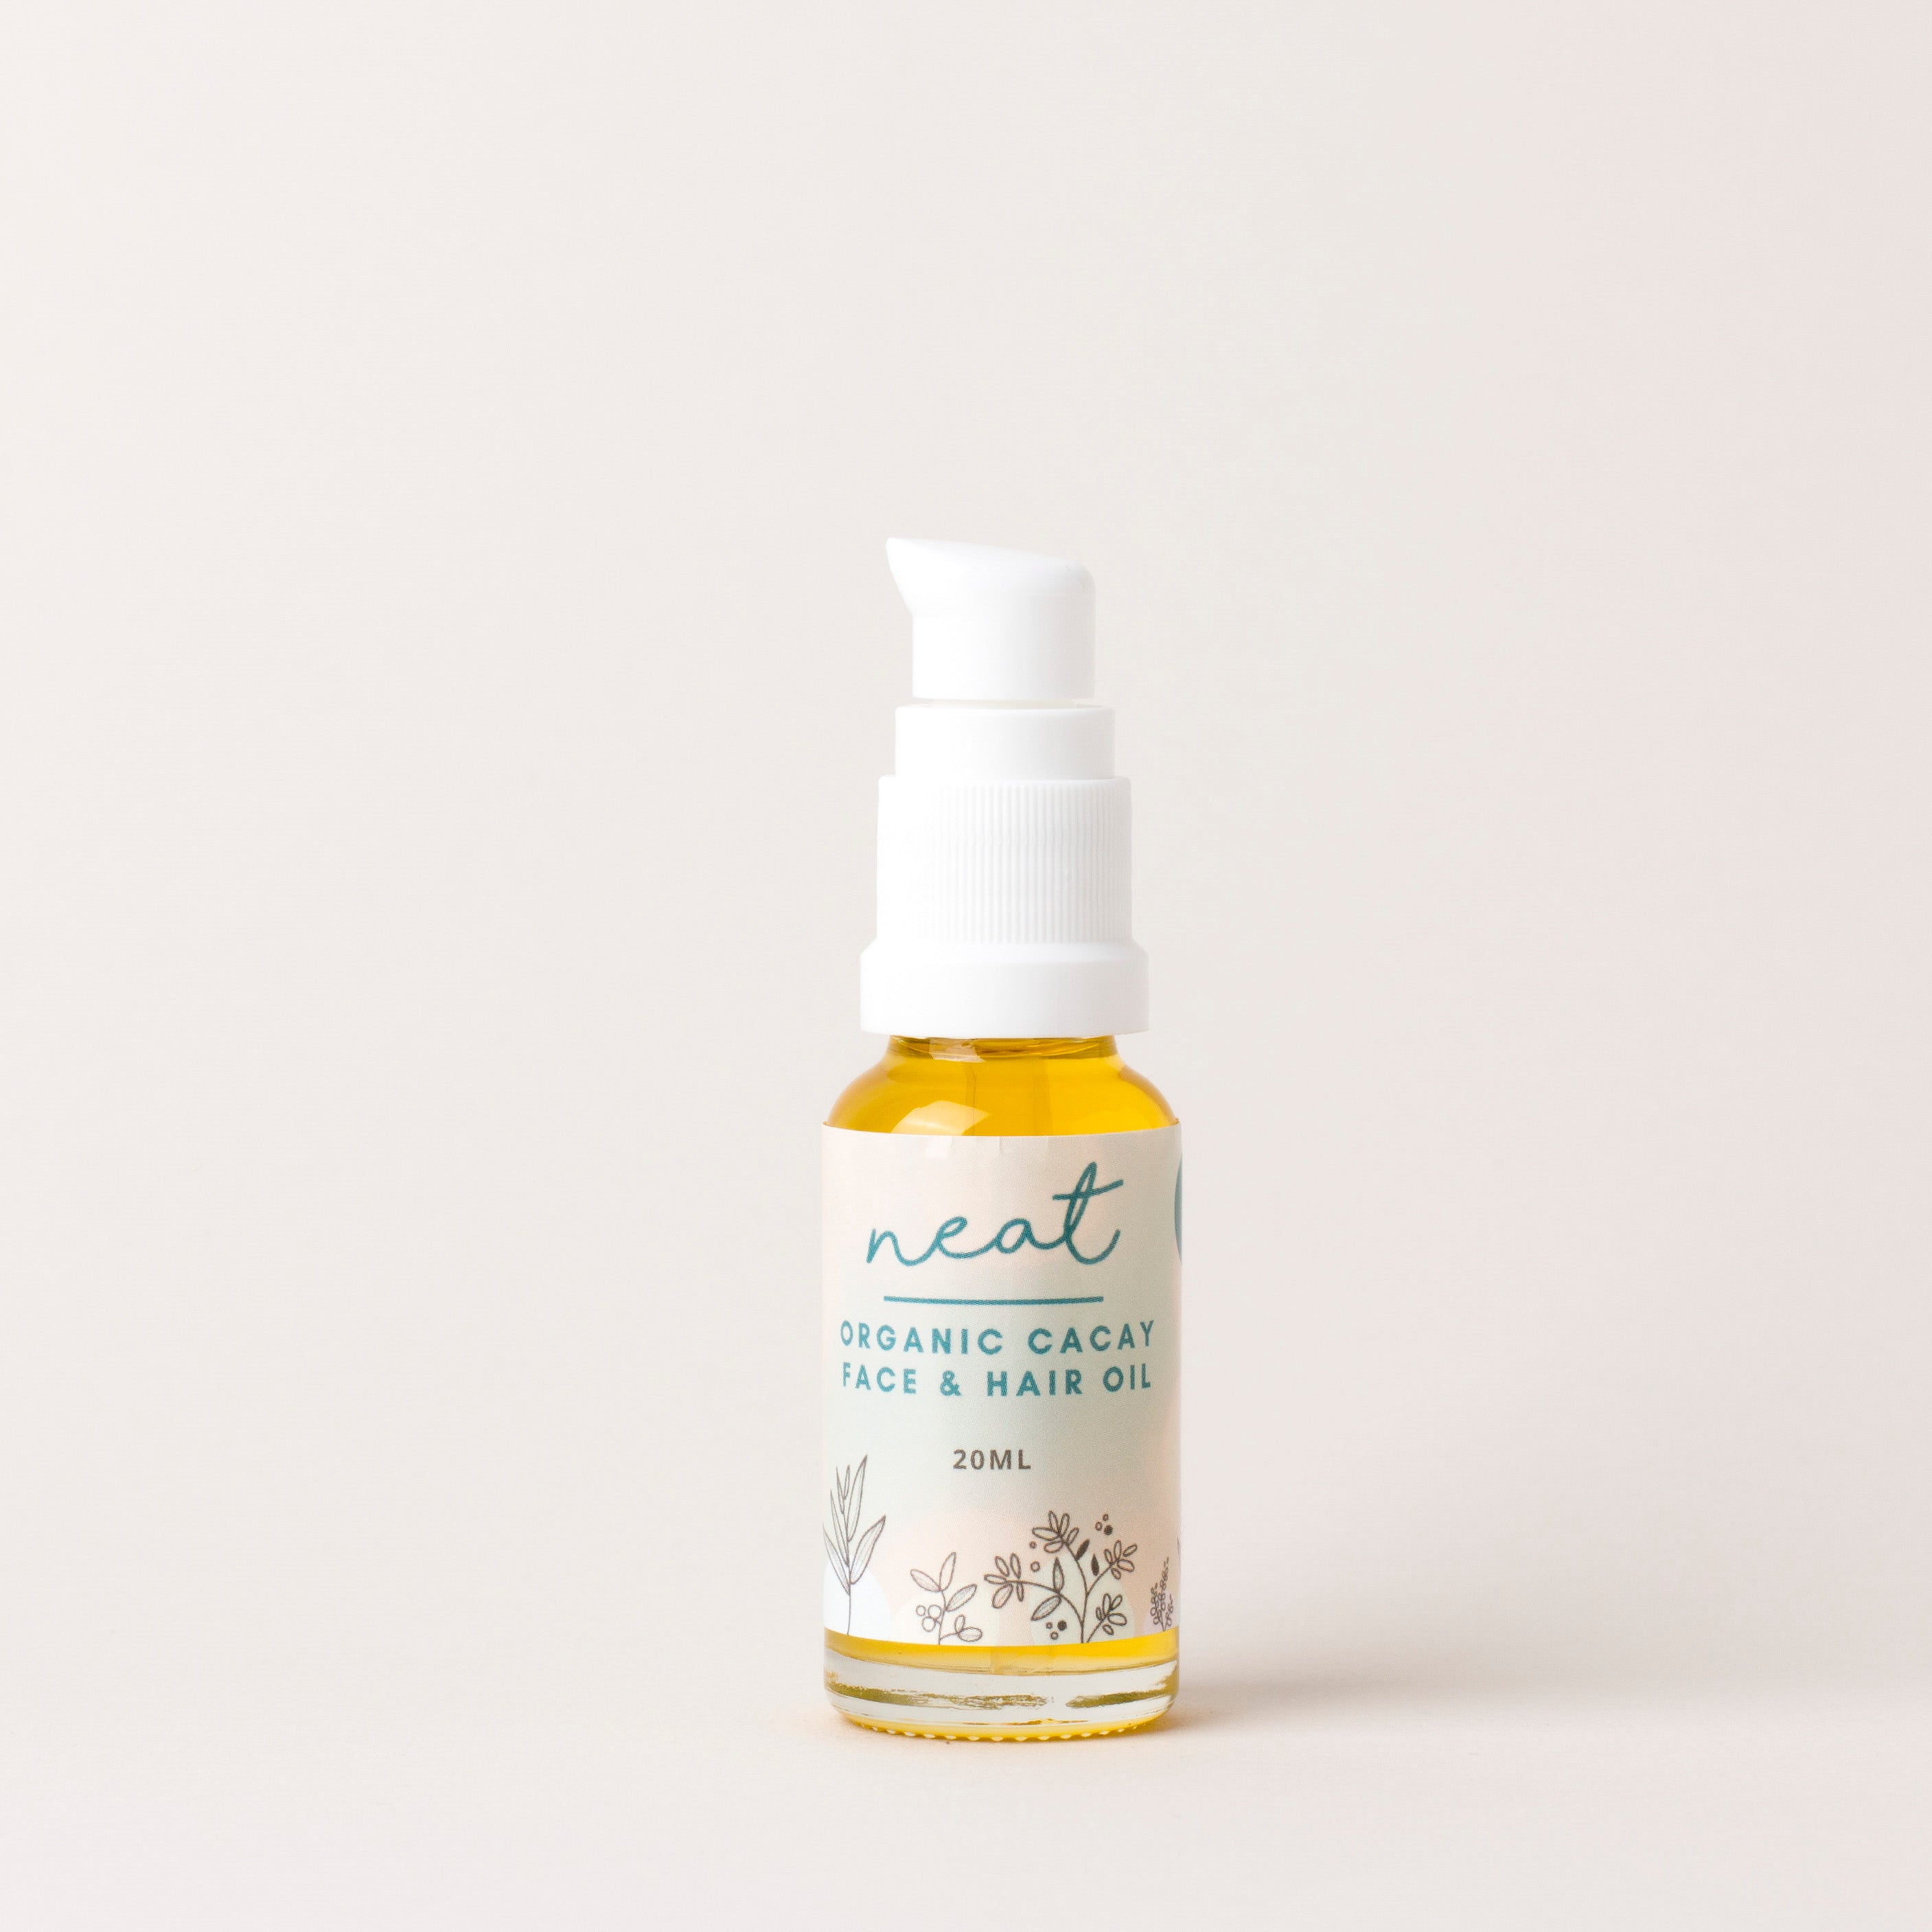 Organic Cacay Face and Hair Oil - Neat